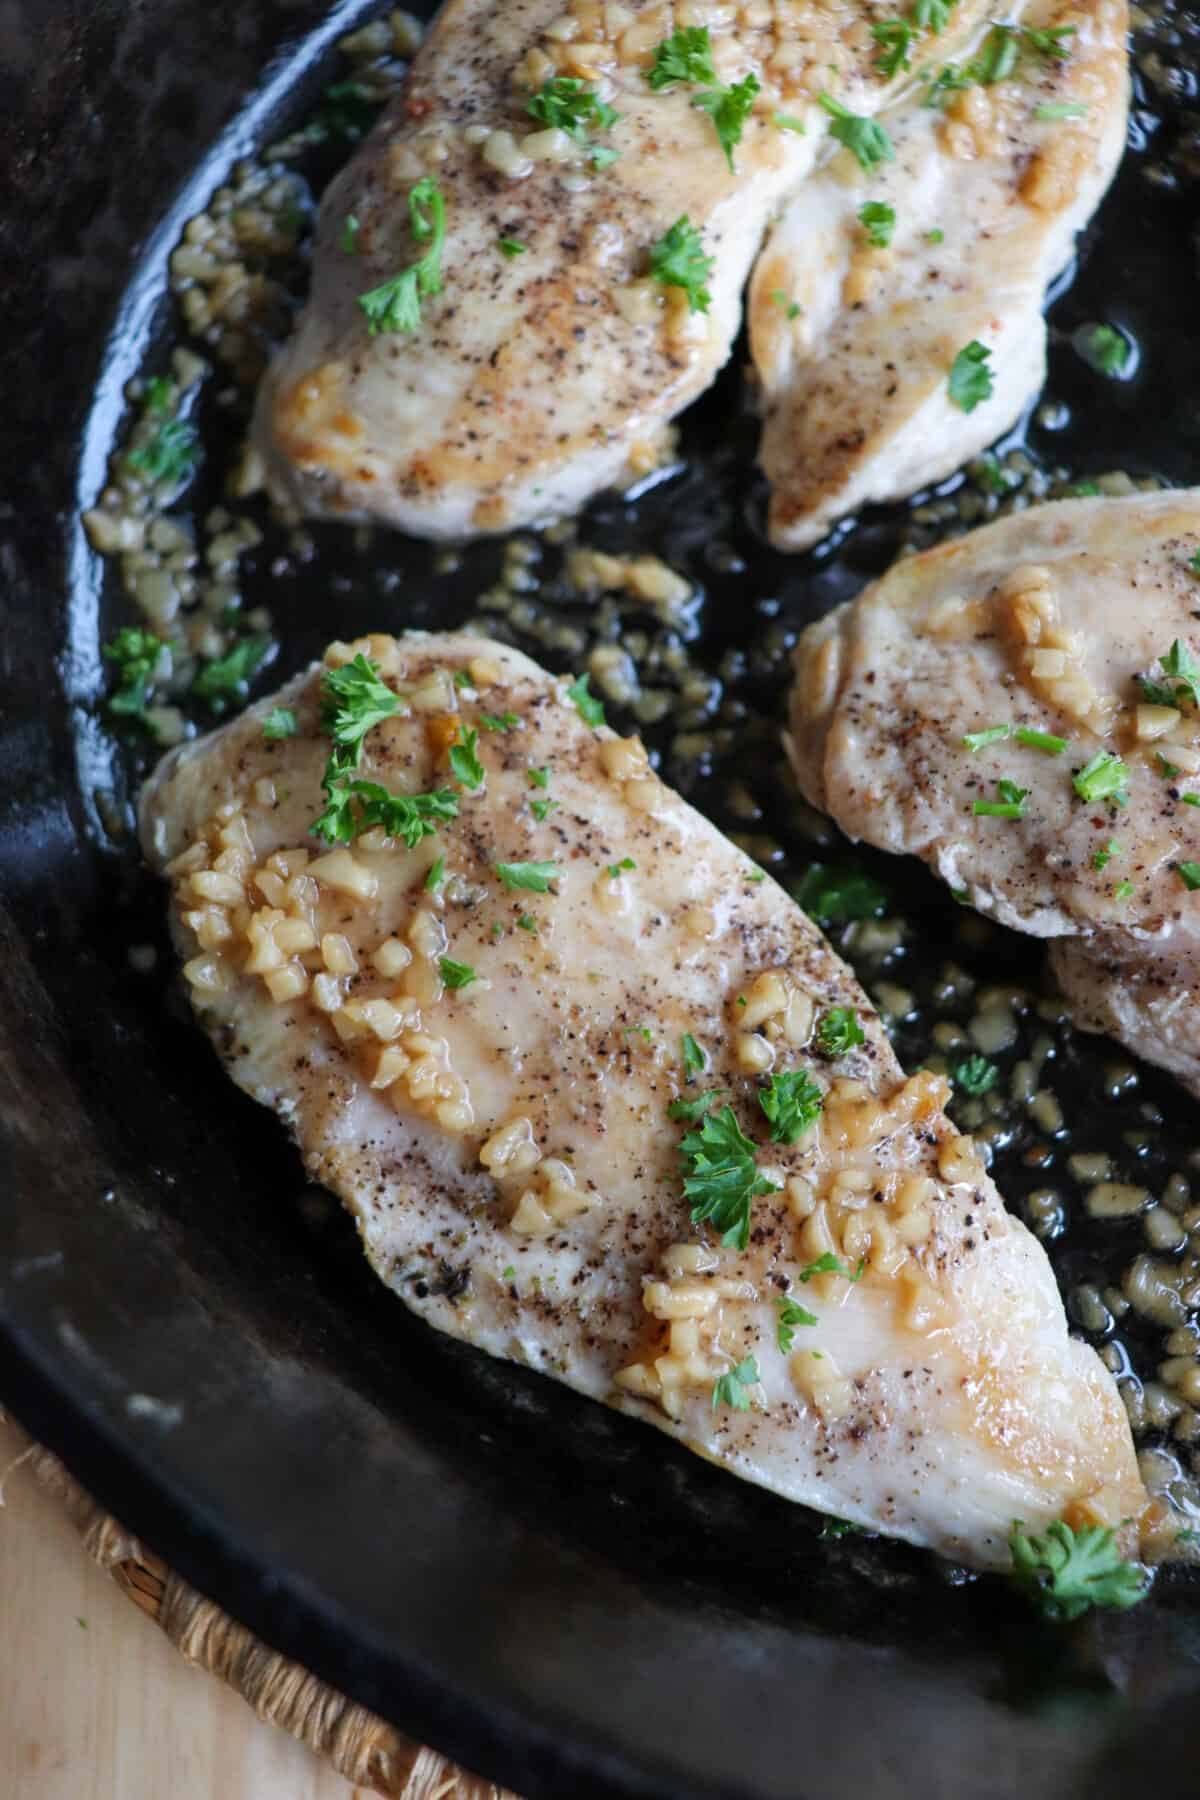 Cooked chicken breast covered in melted butter and garlic in a cast iron skillet.